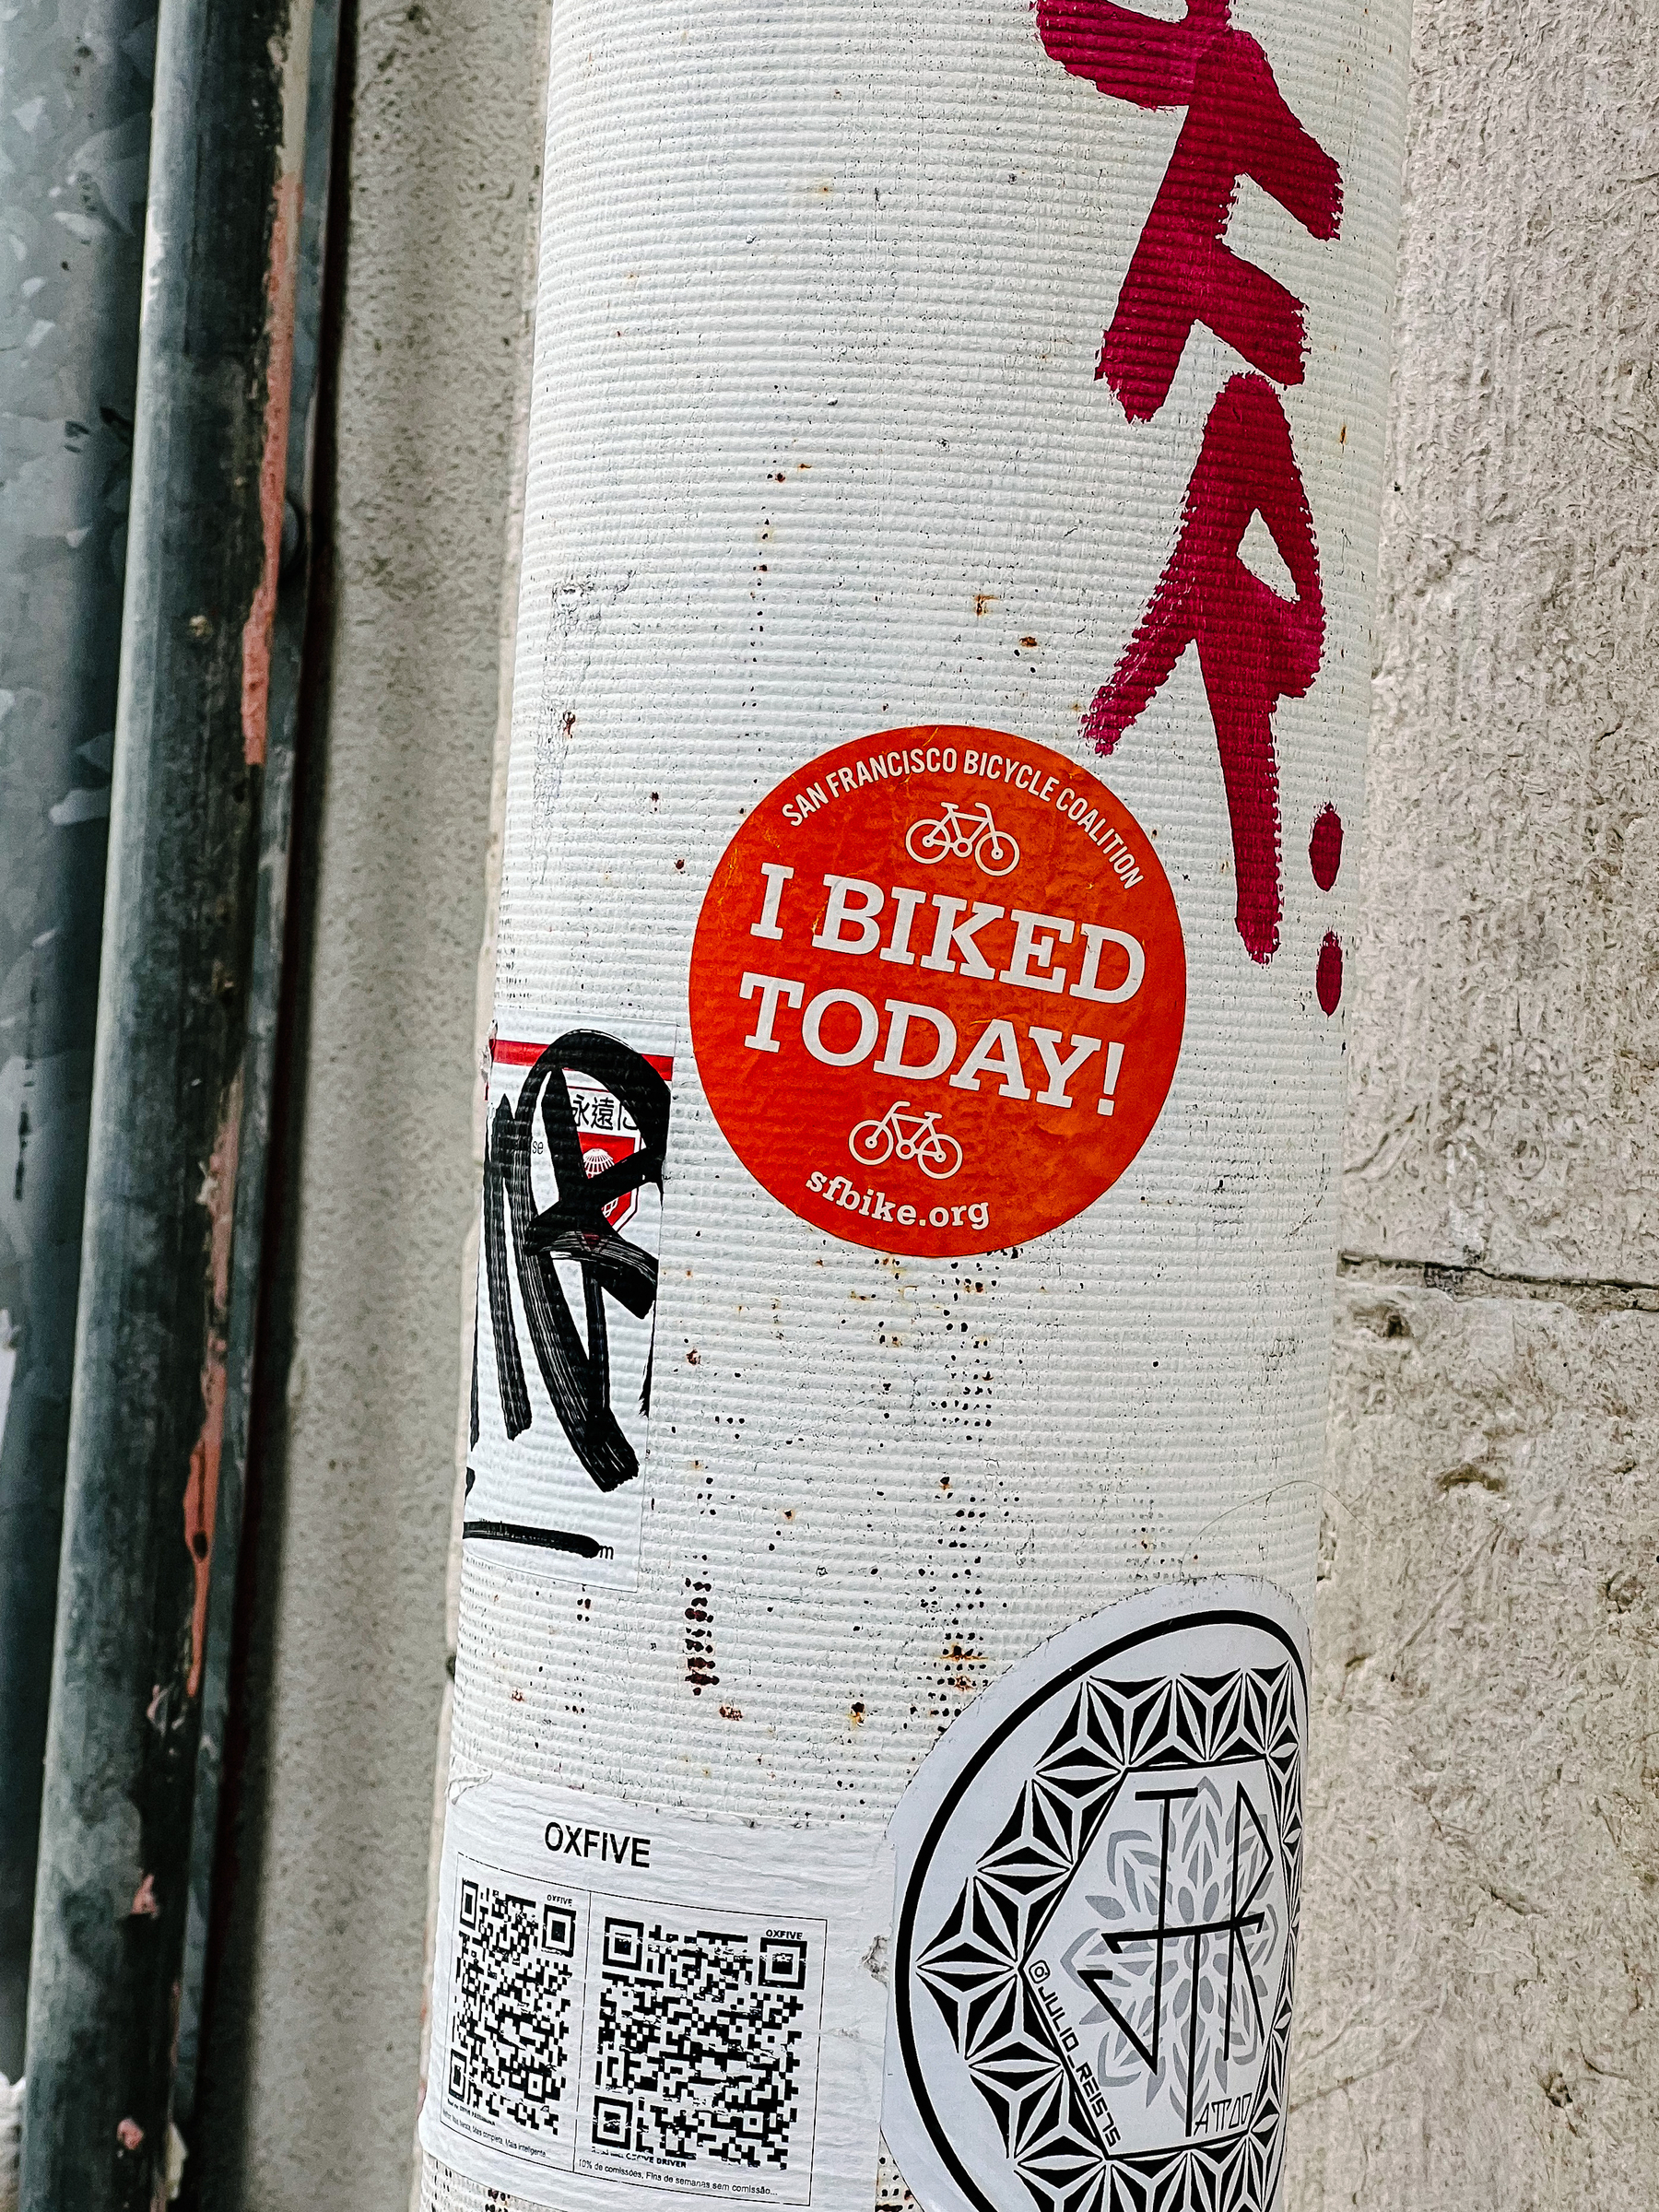 Sticker with the words “I biked today!” and “San Francisco Bicycle Coalition”, with two little bicycles. 